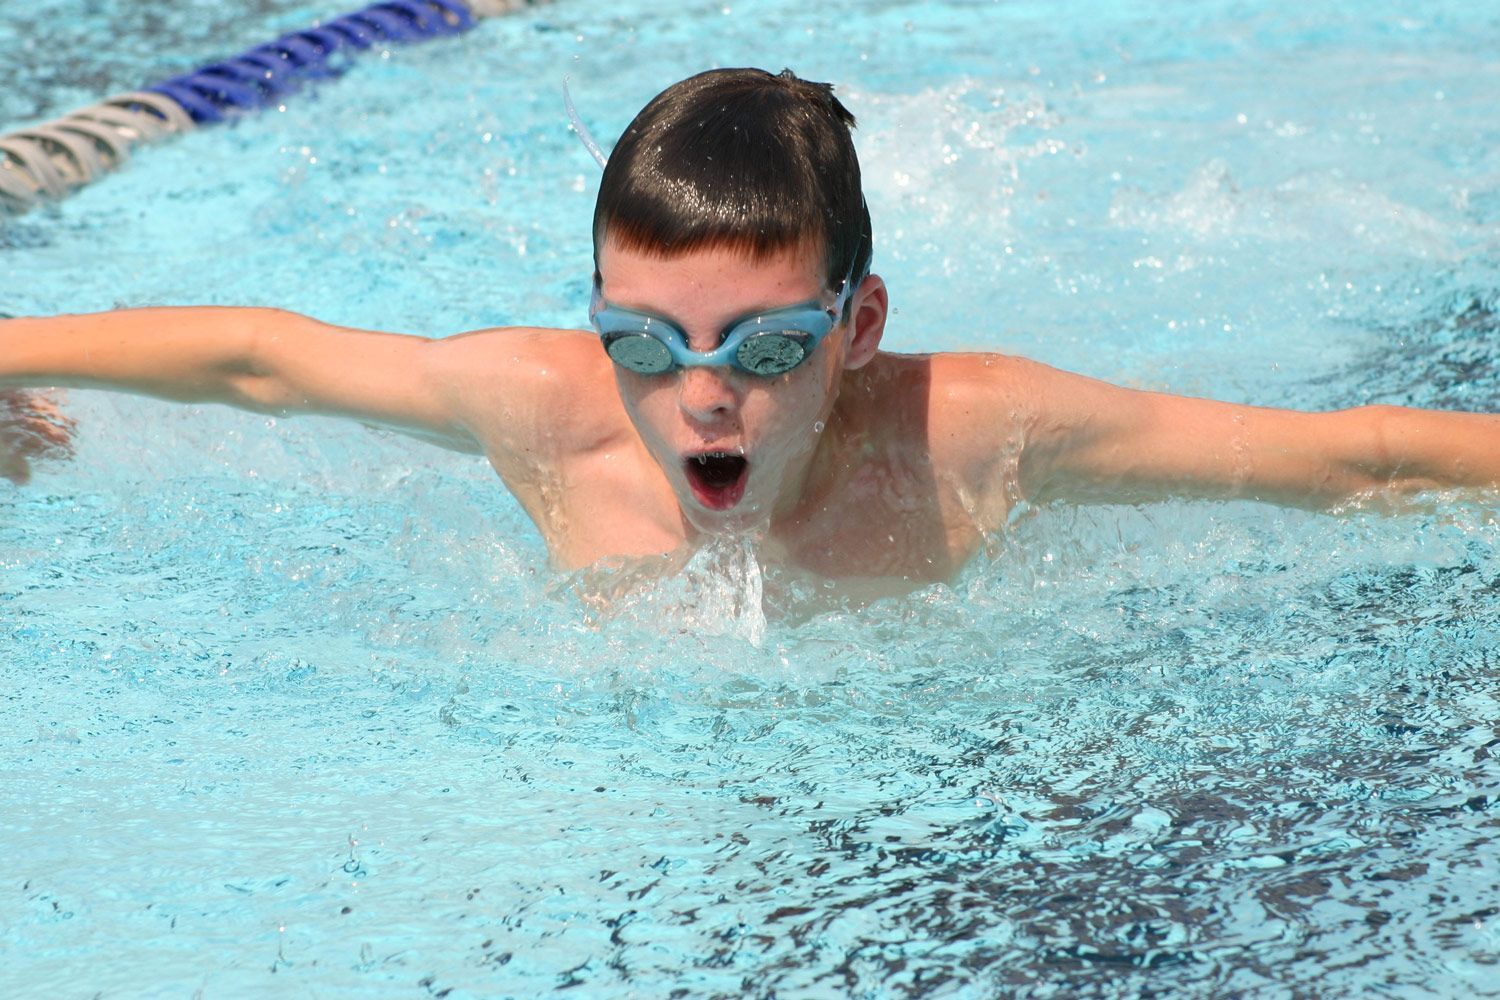 A young boy is swimming in a swimming pool wearing goggles.